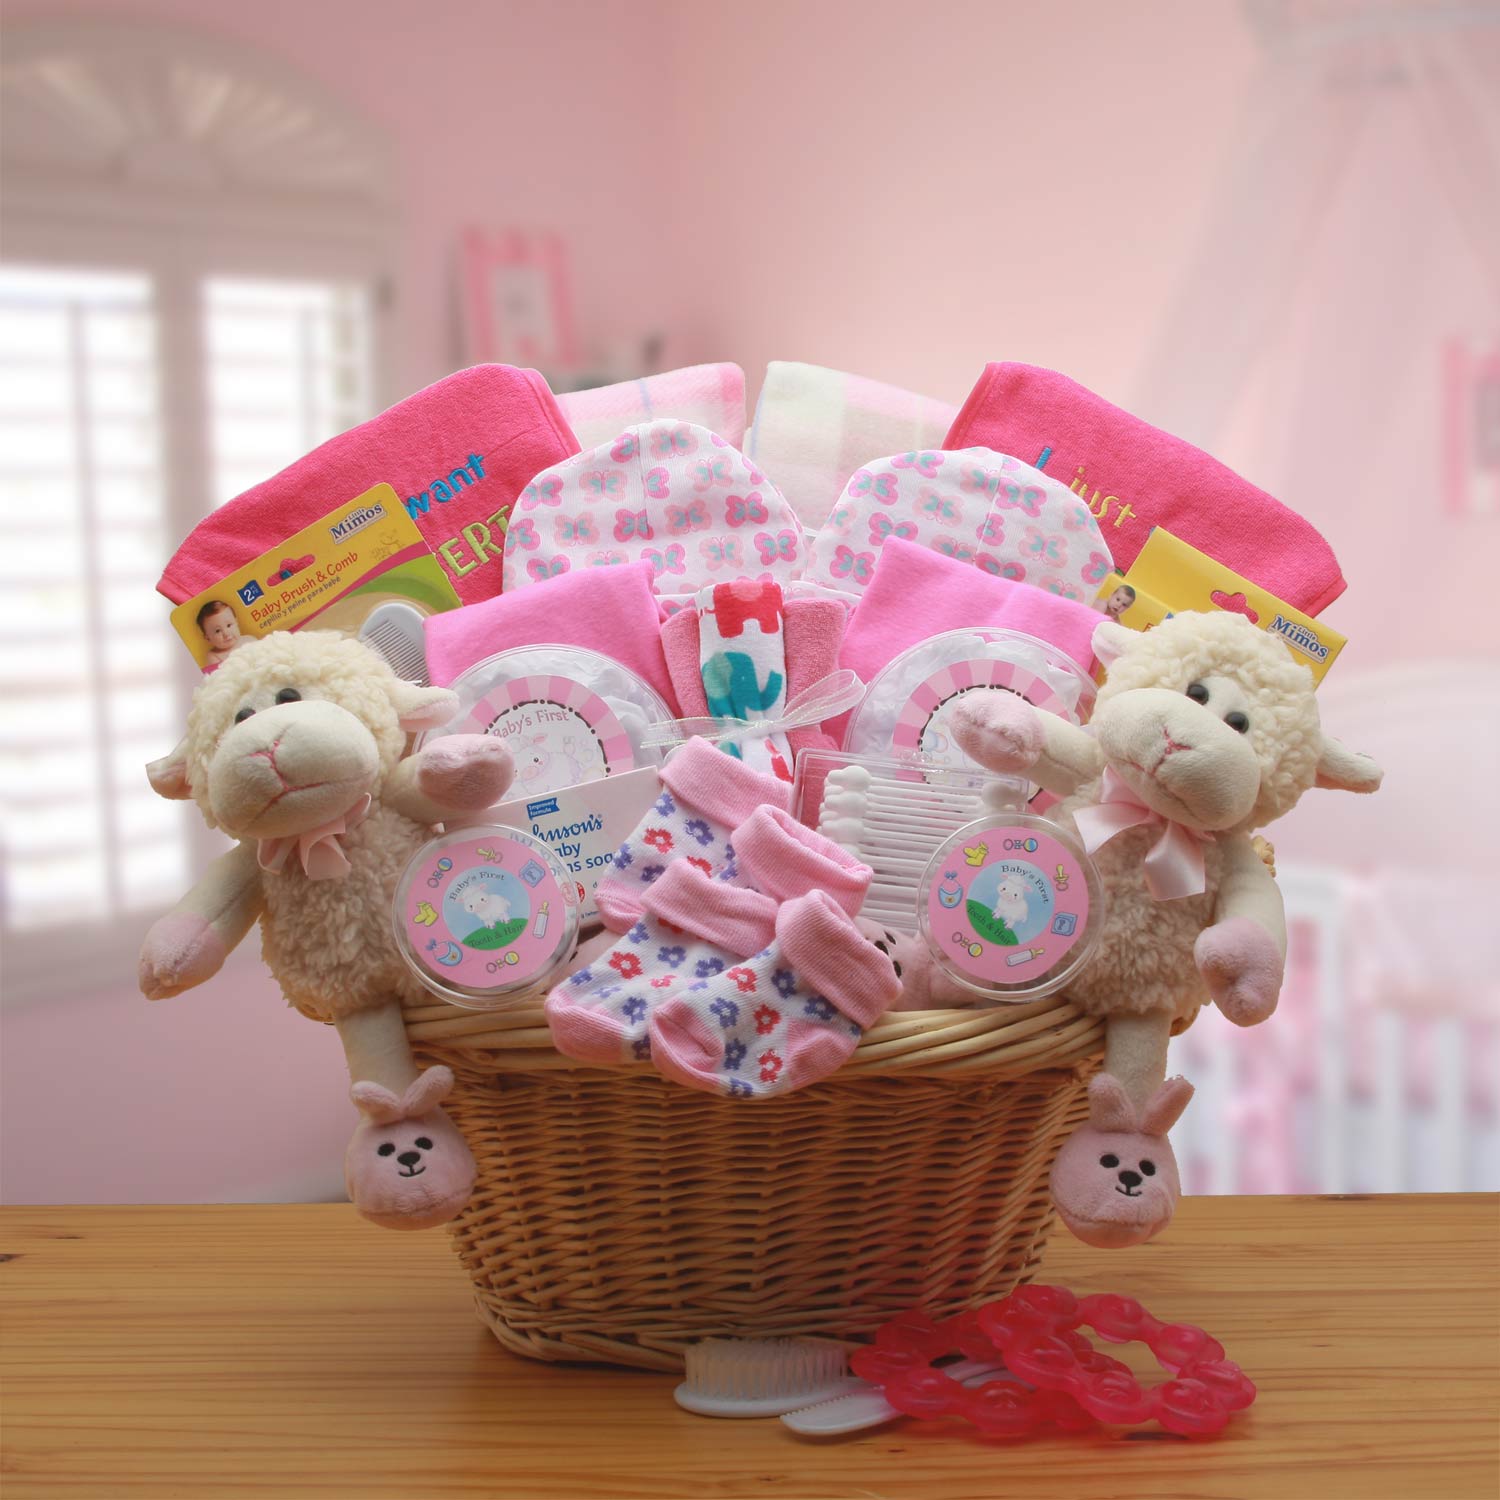 Double Delight Twins New Babies Gift Basket - Pink Flower Bouquet